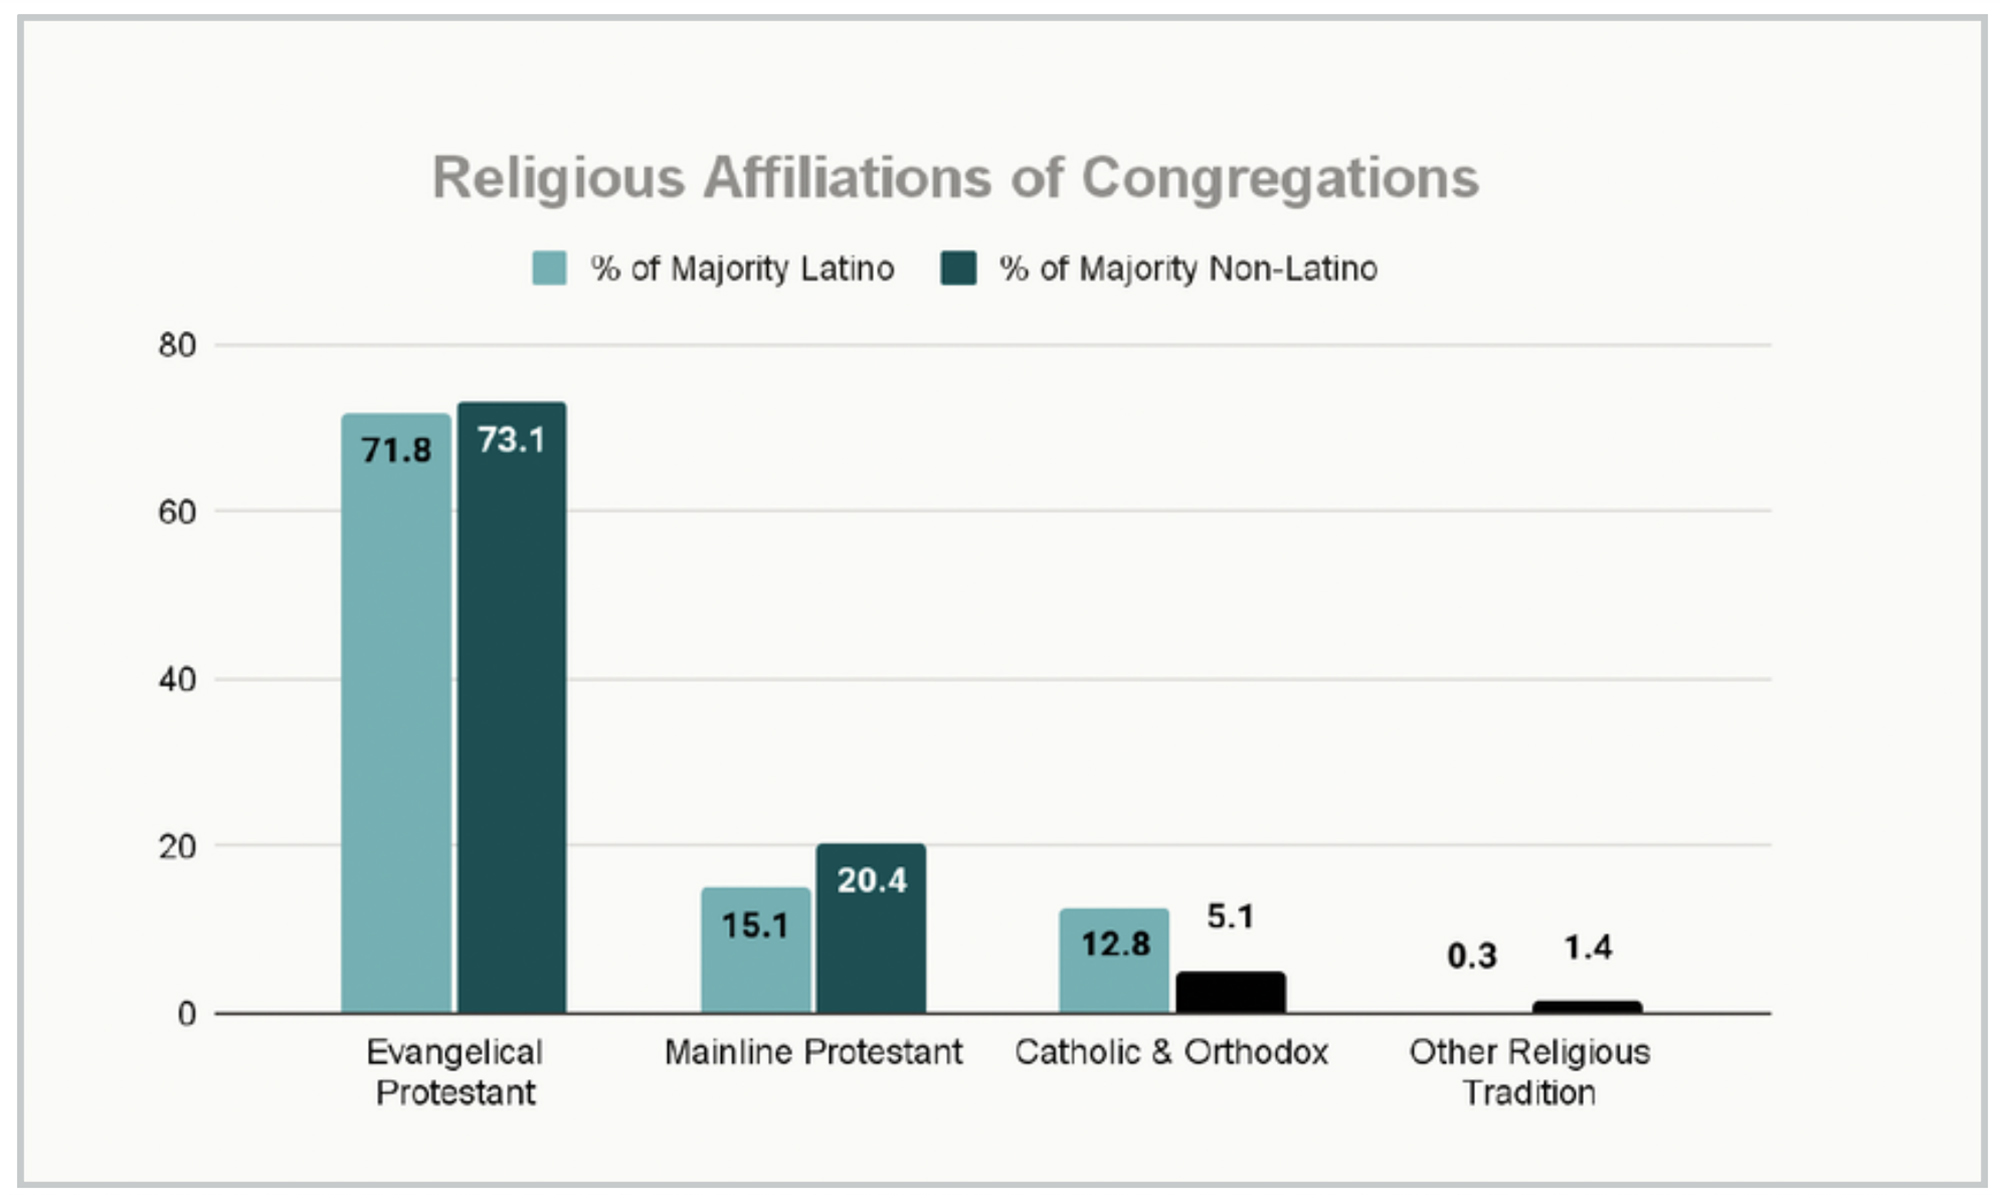 "Religious Affiliations of Congregations" (Graphic courtesy Hartford Institute for Religion Research)